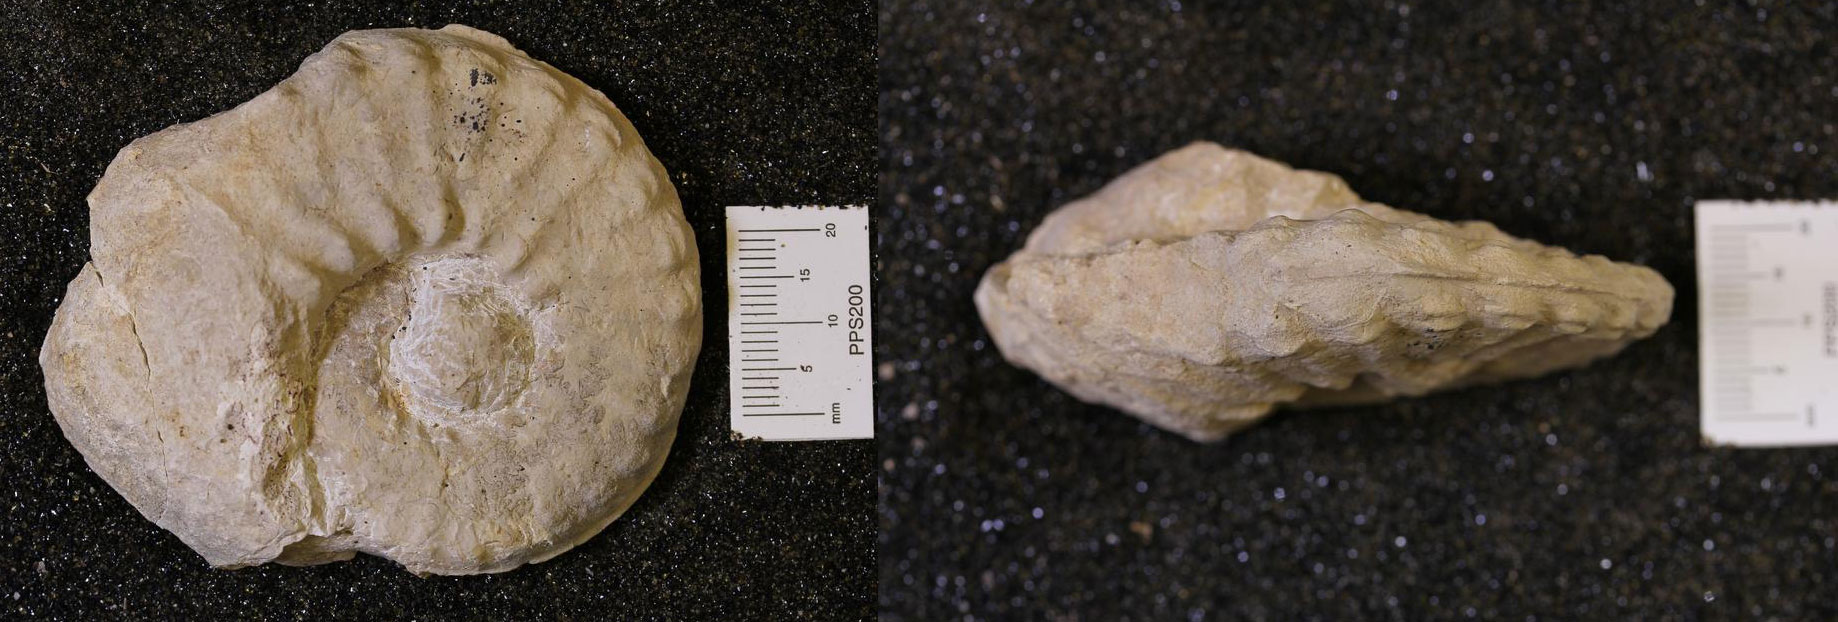 Photos of a ammonoid from the Early Cretaceous of Texas a side view of the spiraling shell and the shell from the narrow side.